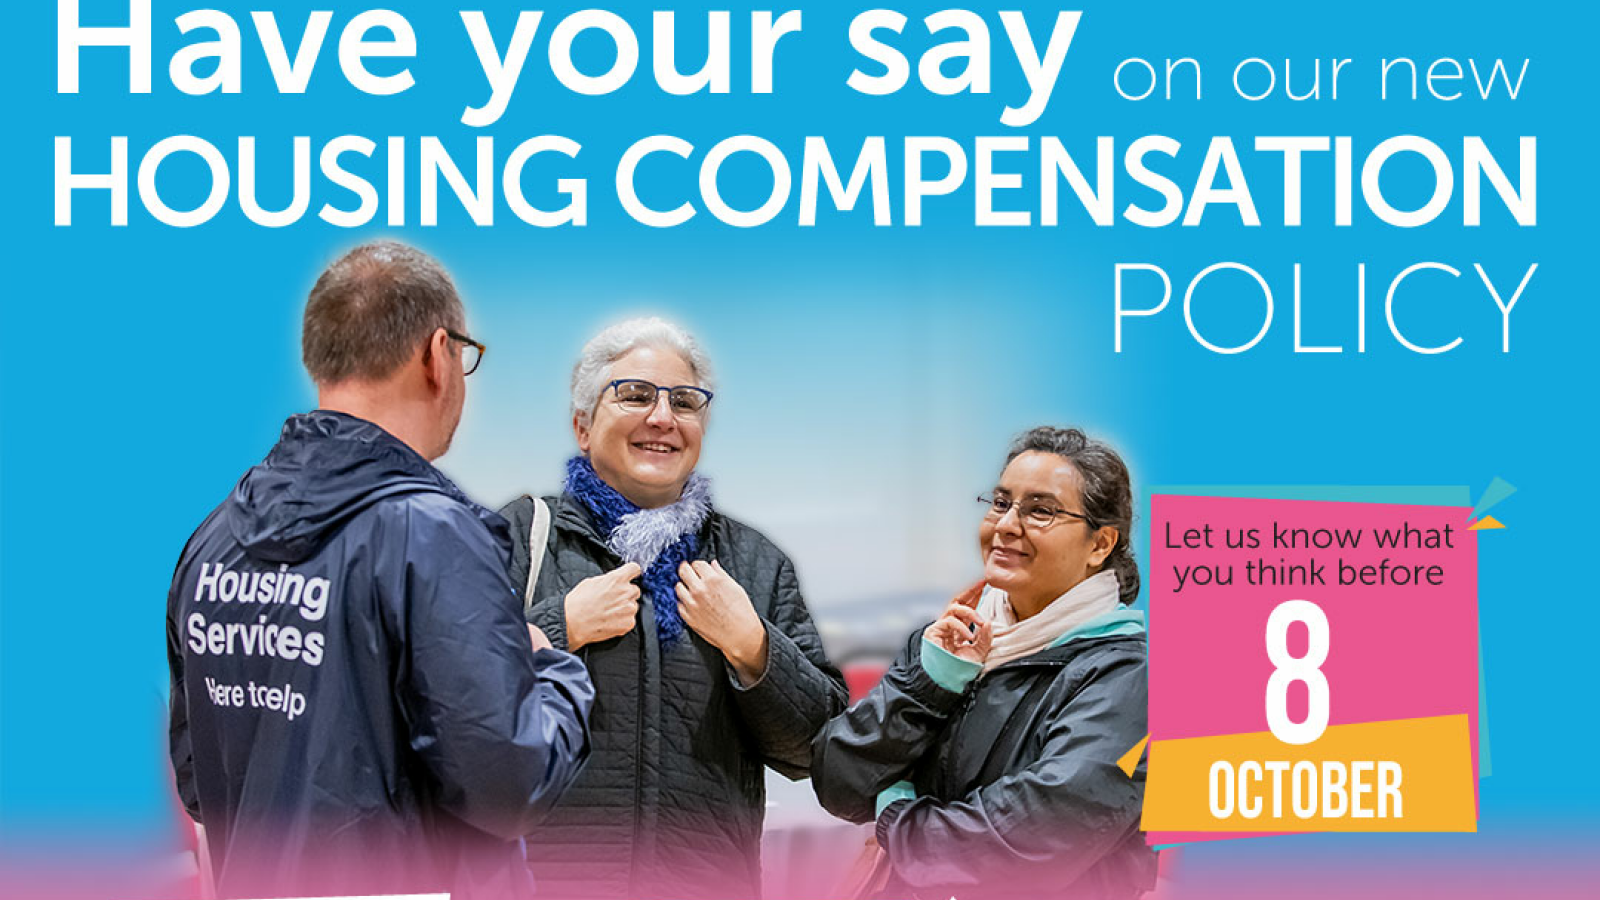 Hosusing Compensation policy